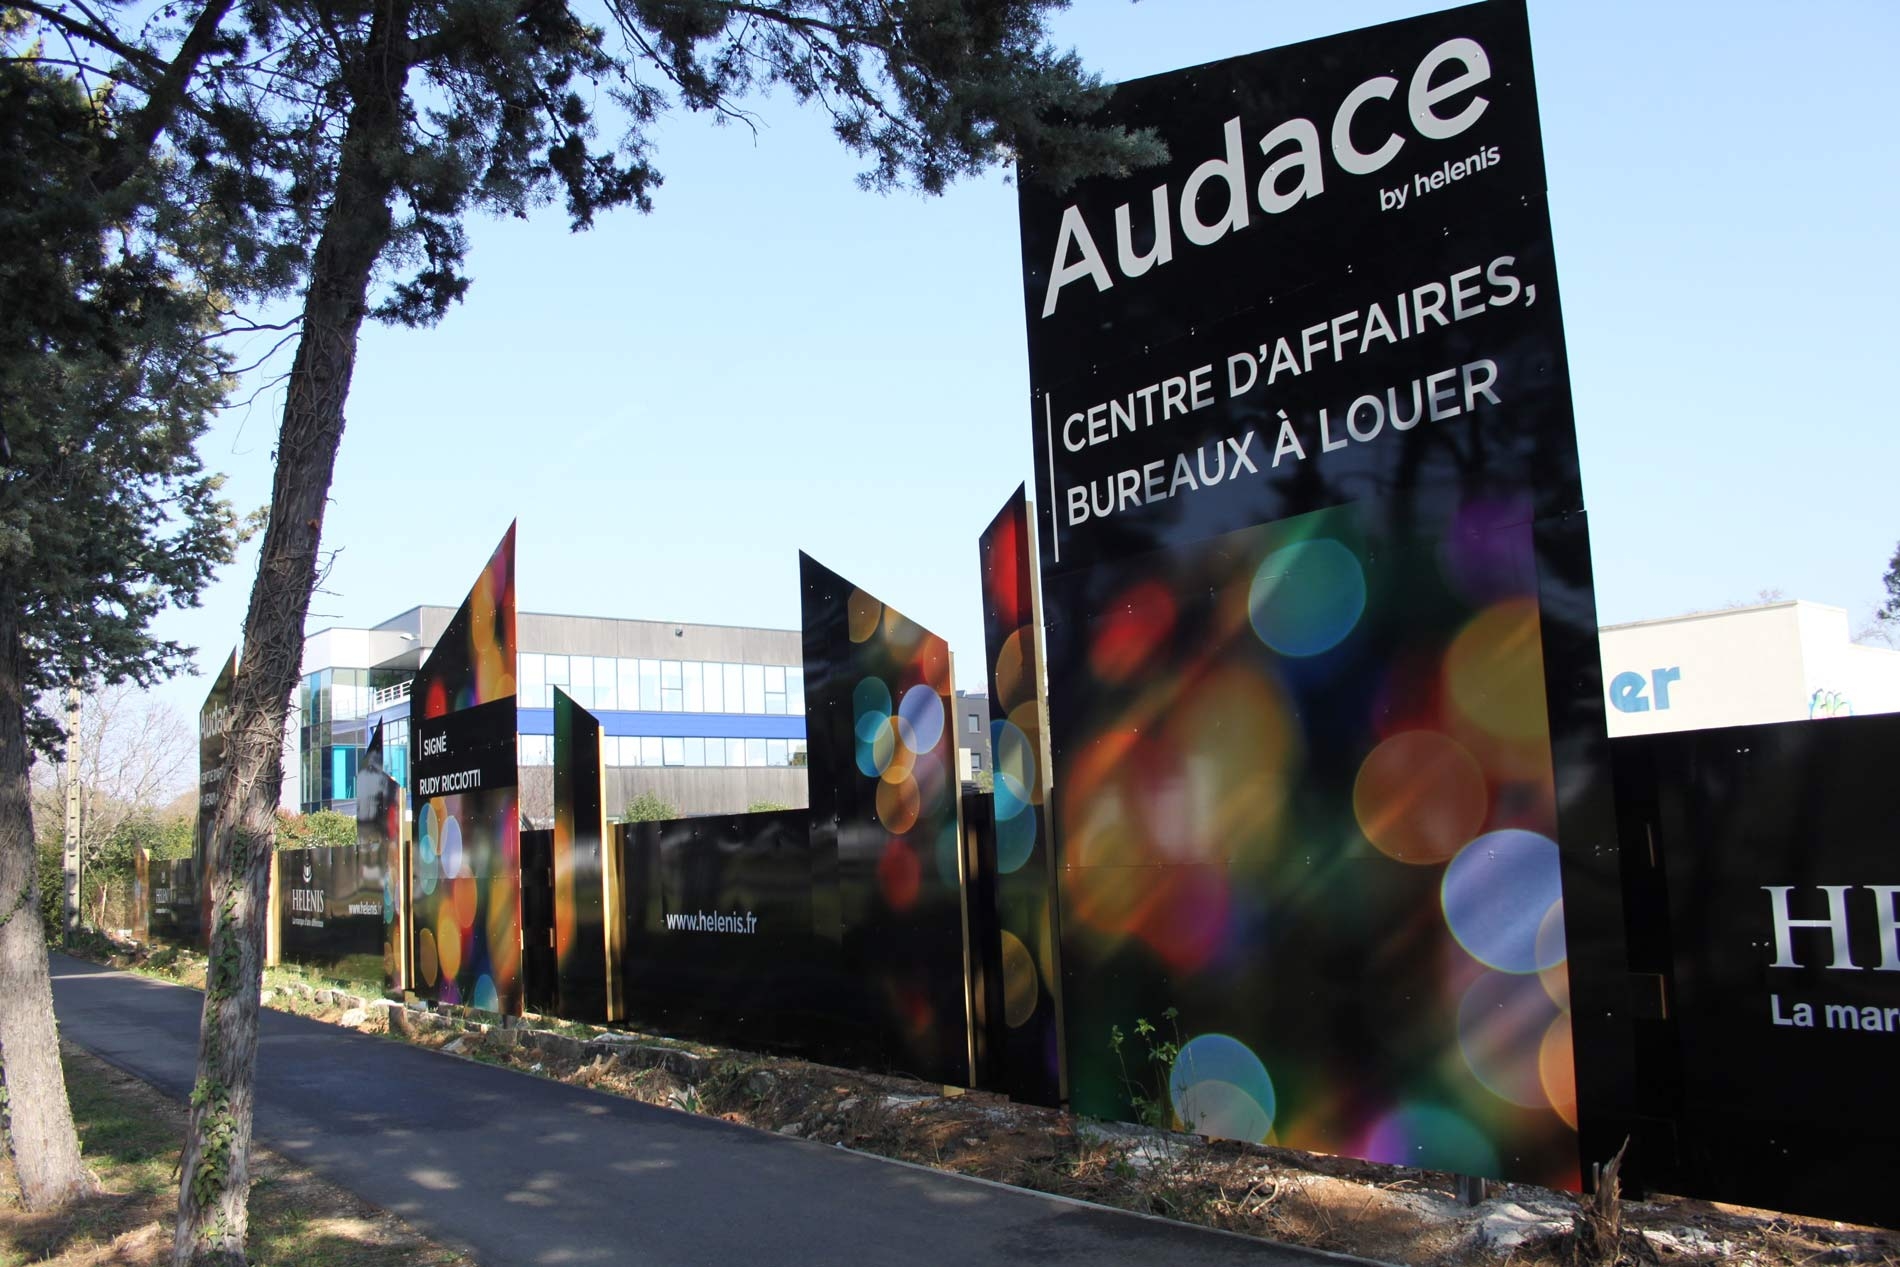 Audace  by HELENIS